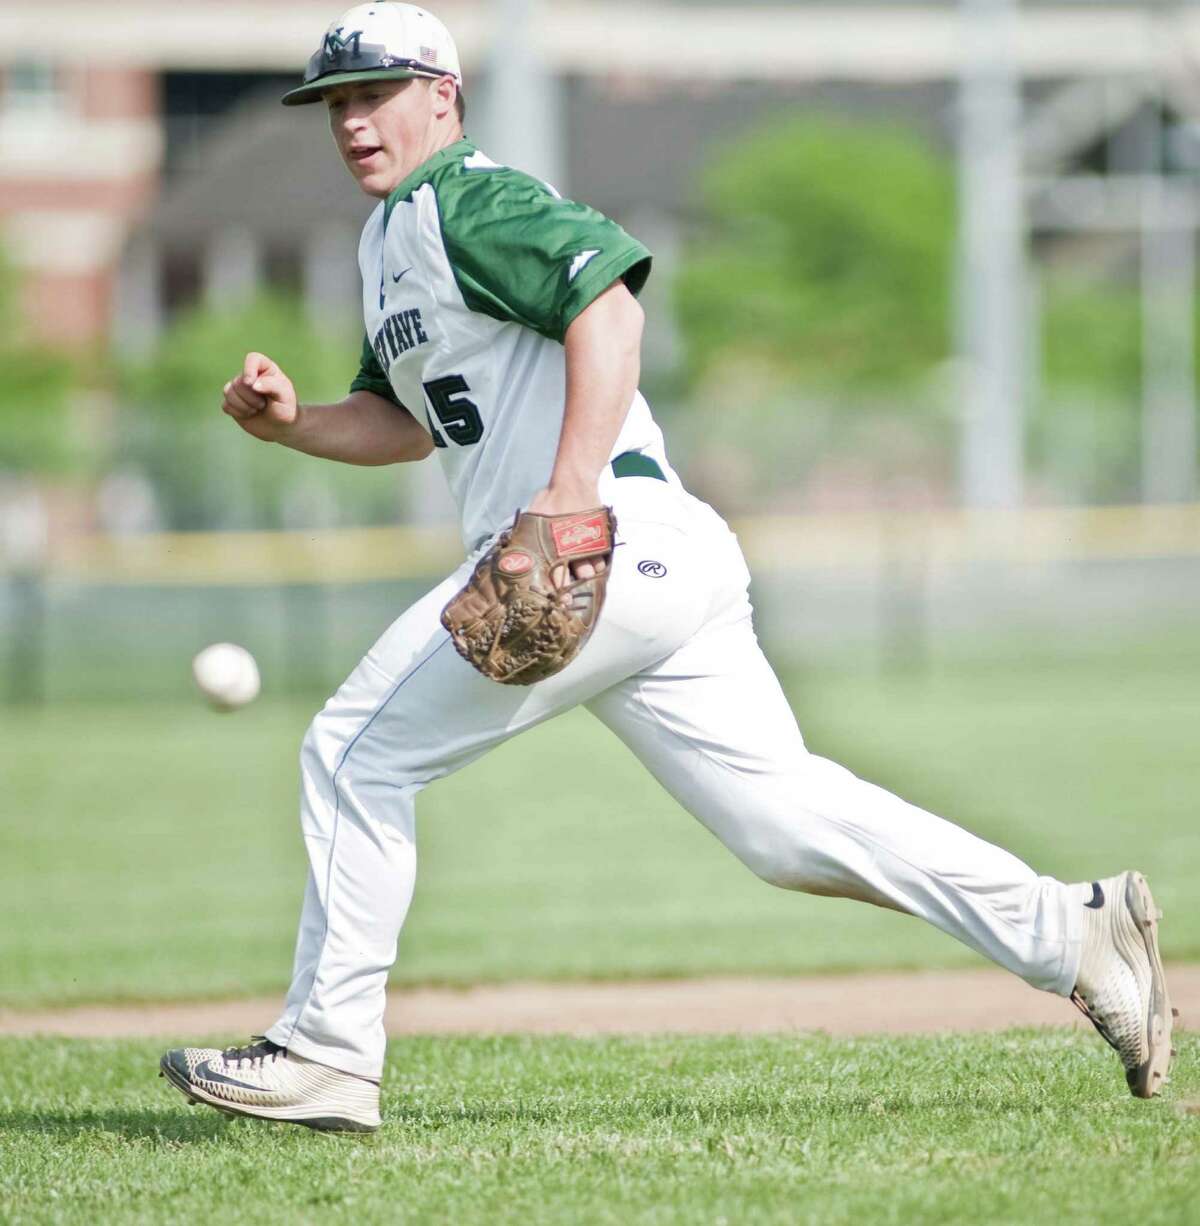 New Milford High School third baseman Brendon Profita chases a ground ball in a game against Bristol Central High School, played at New Milford. Wednesday, June 1, 2016